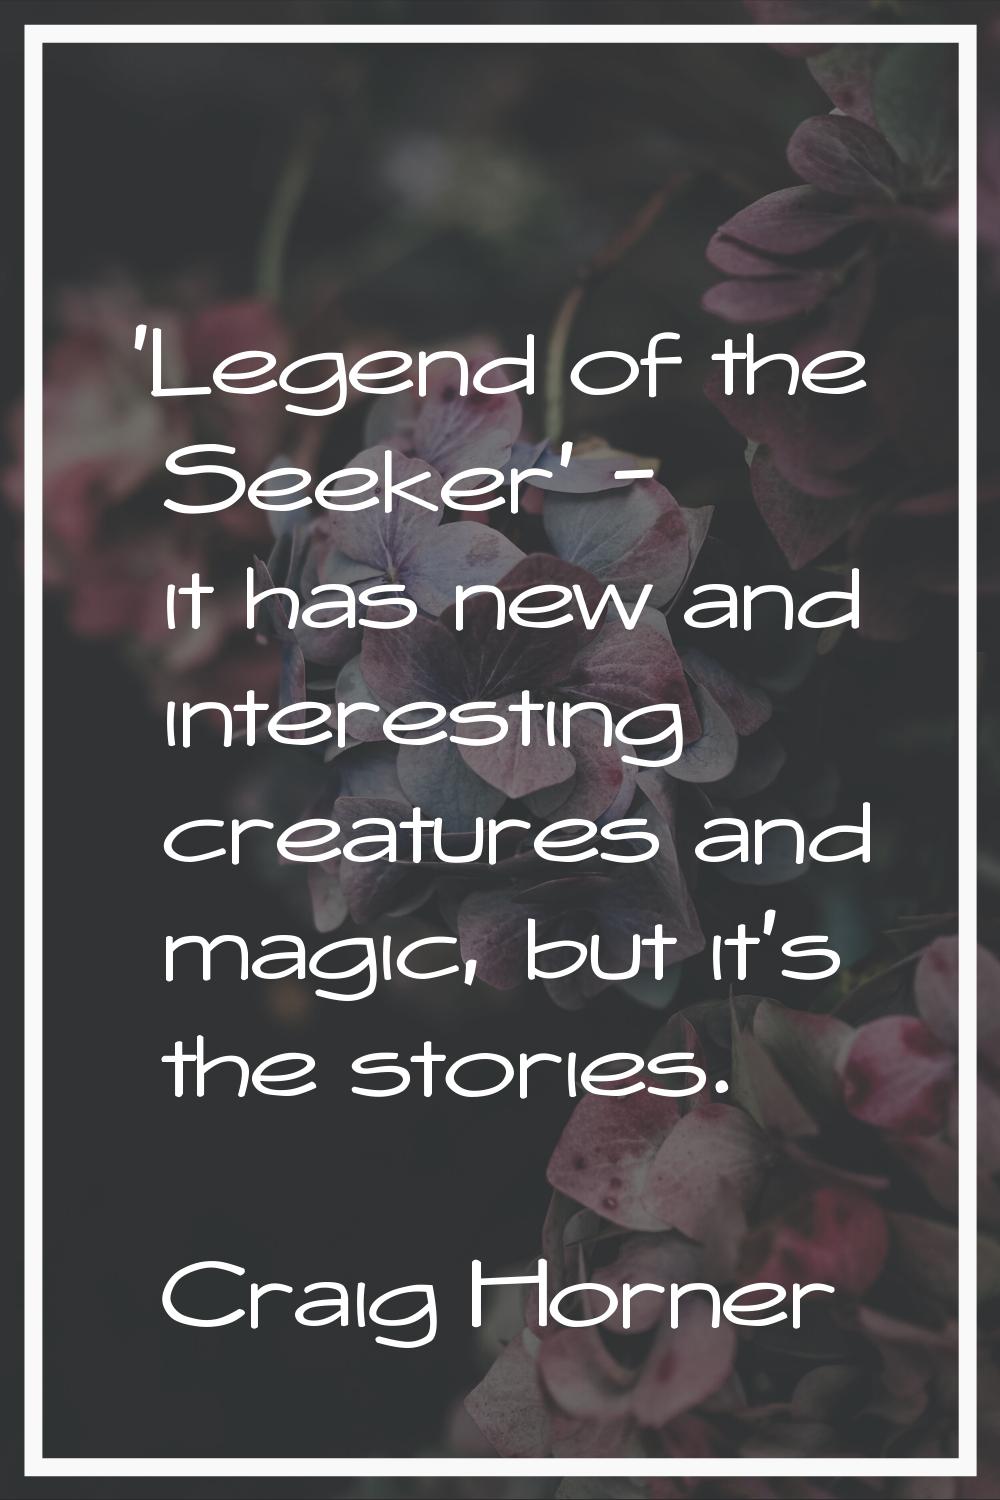 'Legend of the Seeker' - it has new and interesting creatures and magic, but it's the stories.